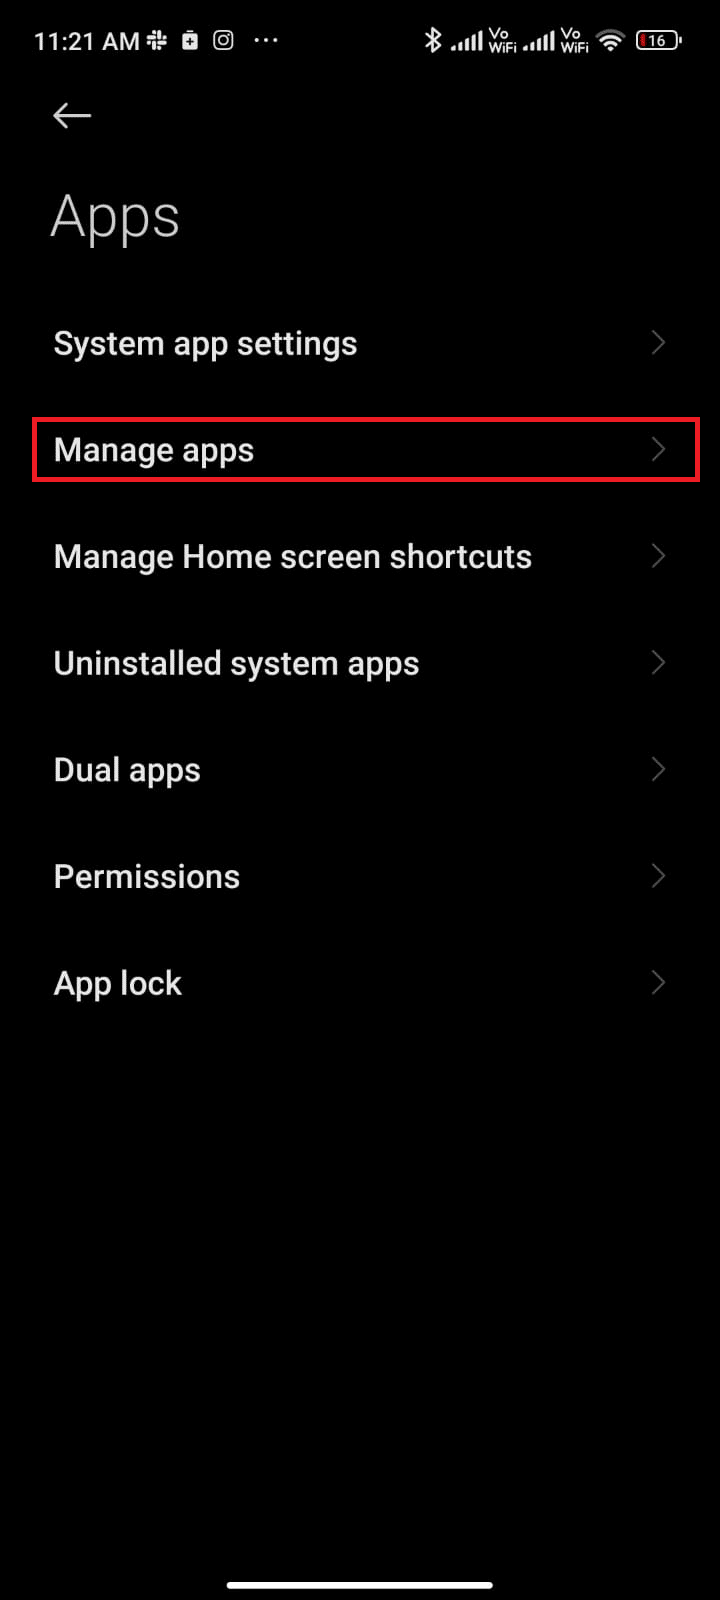 Then, tap Manage apps